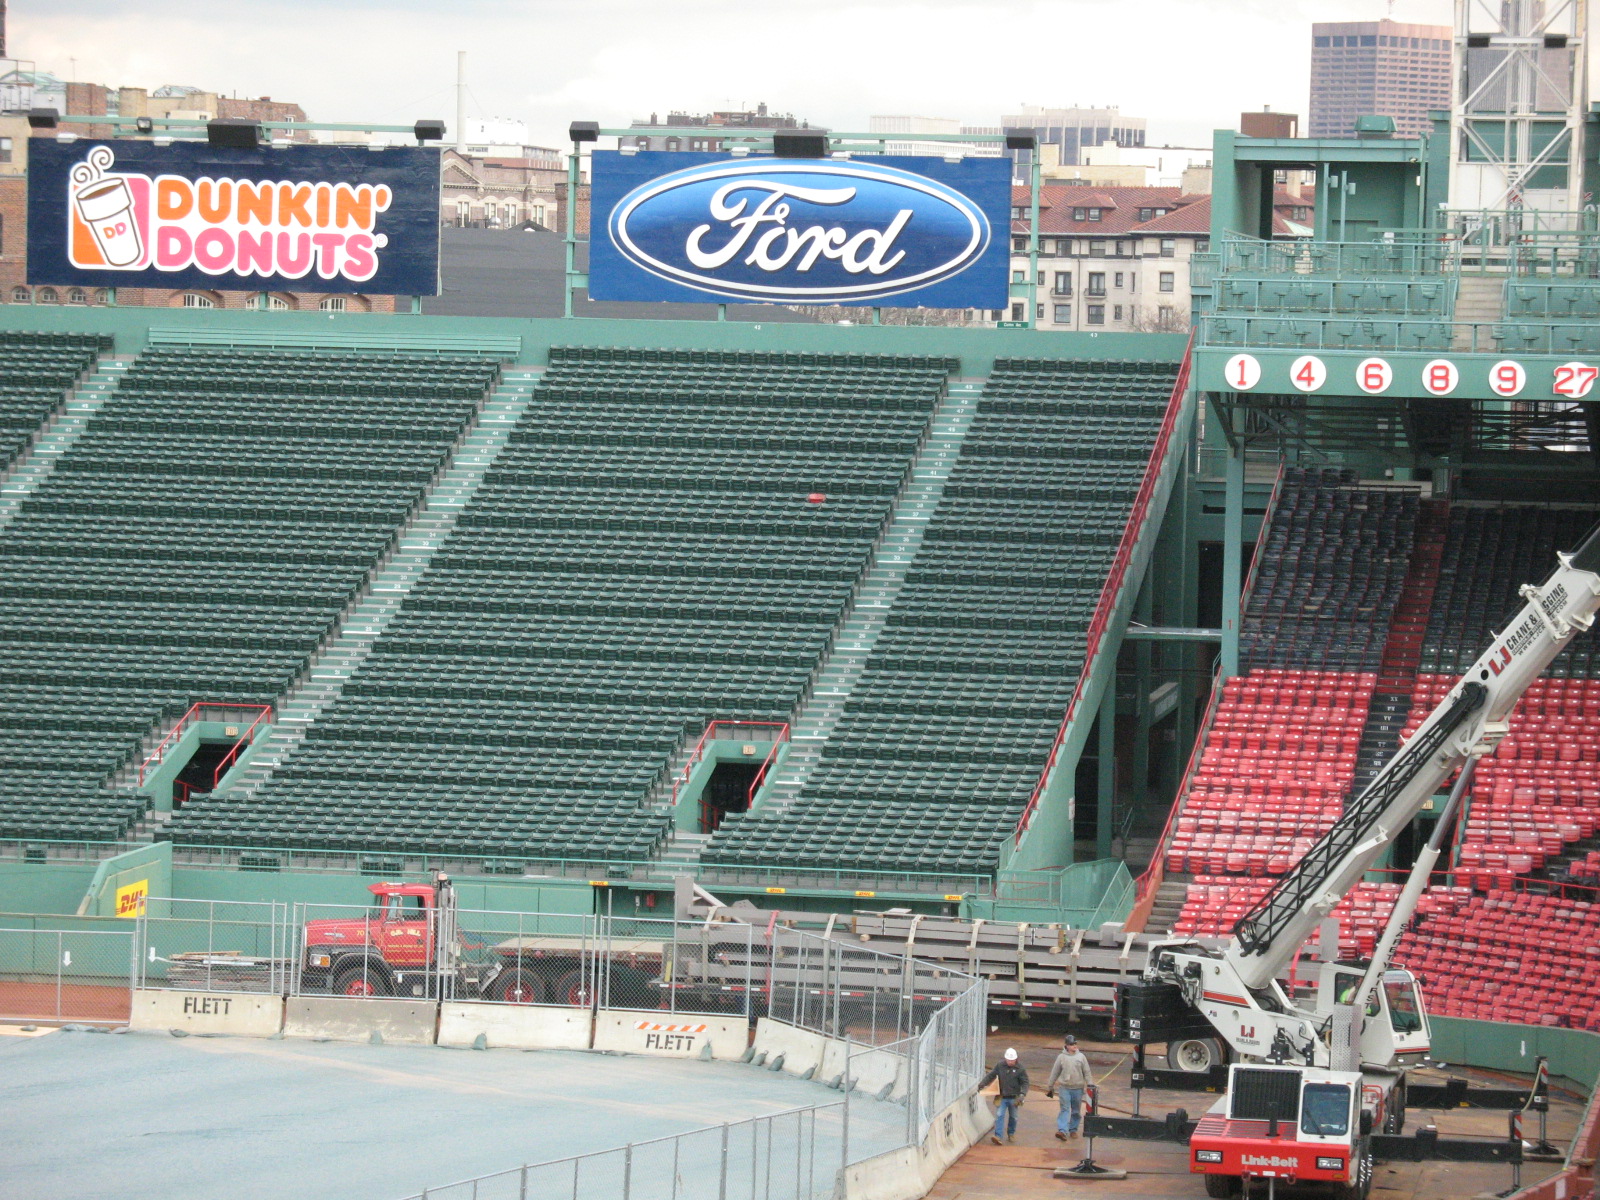 Fenway Park (user submitted)